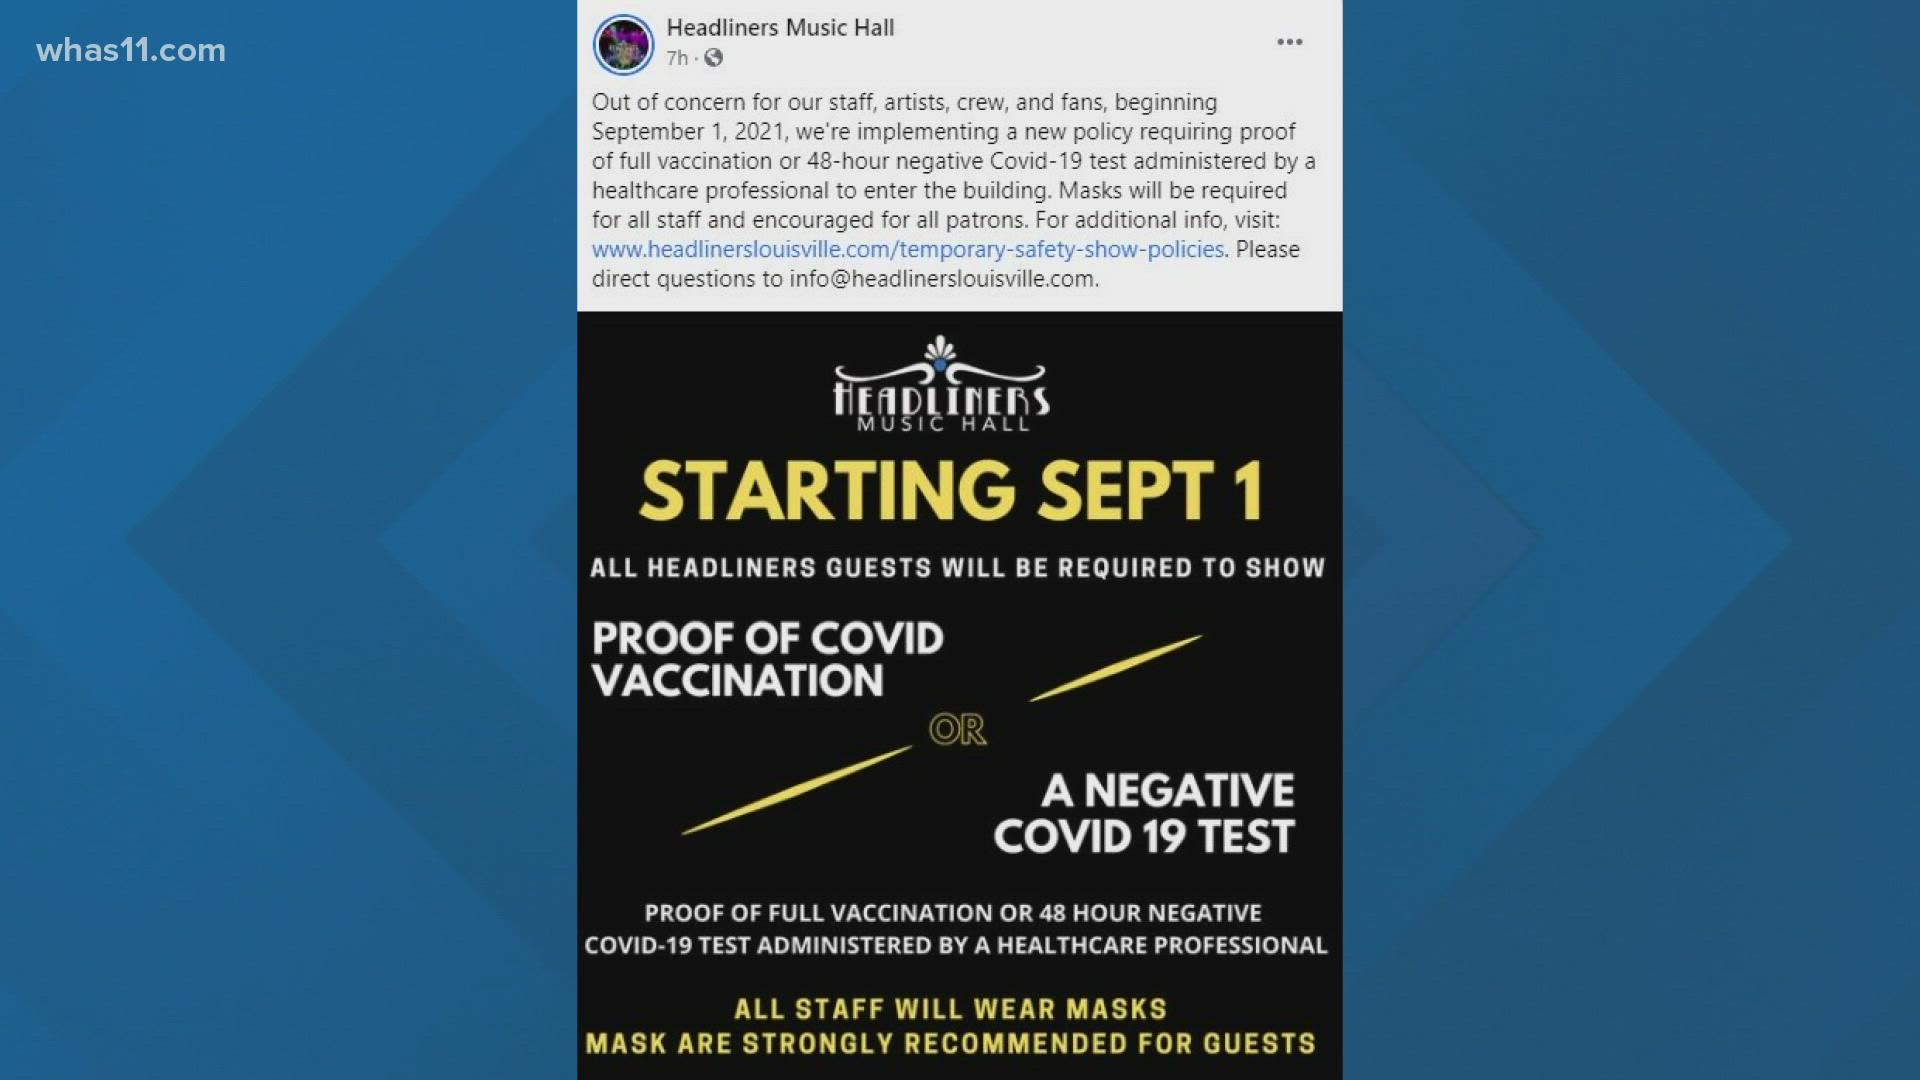 Headliners said beginning Sept. 1, those who attend the concert venue will have to show proof of vaccination or a negative COVID test.